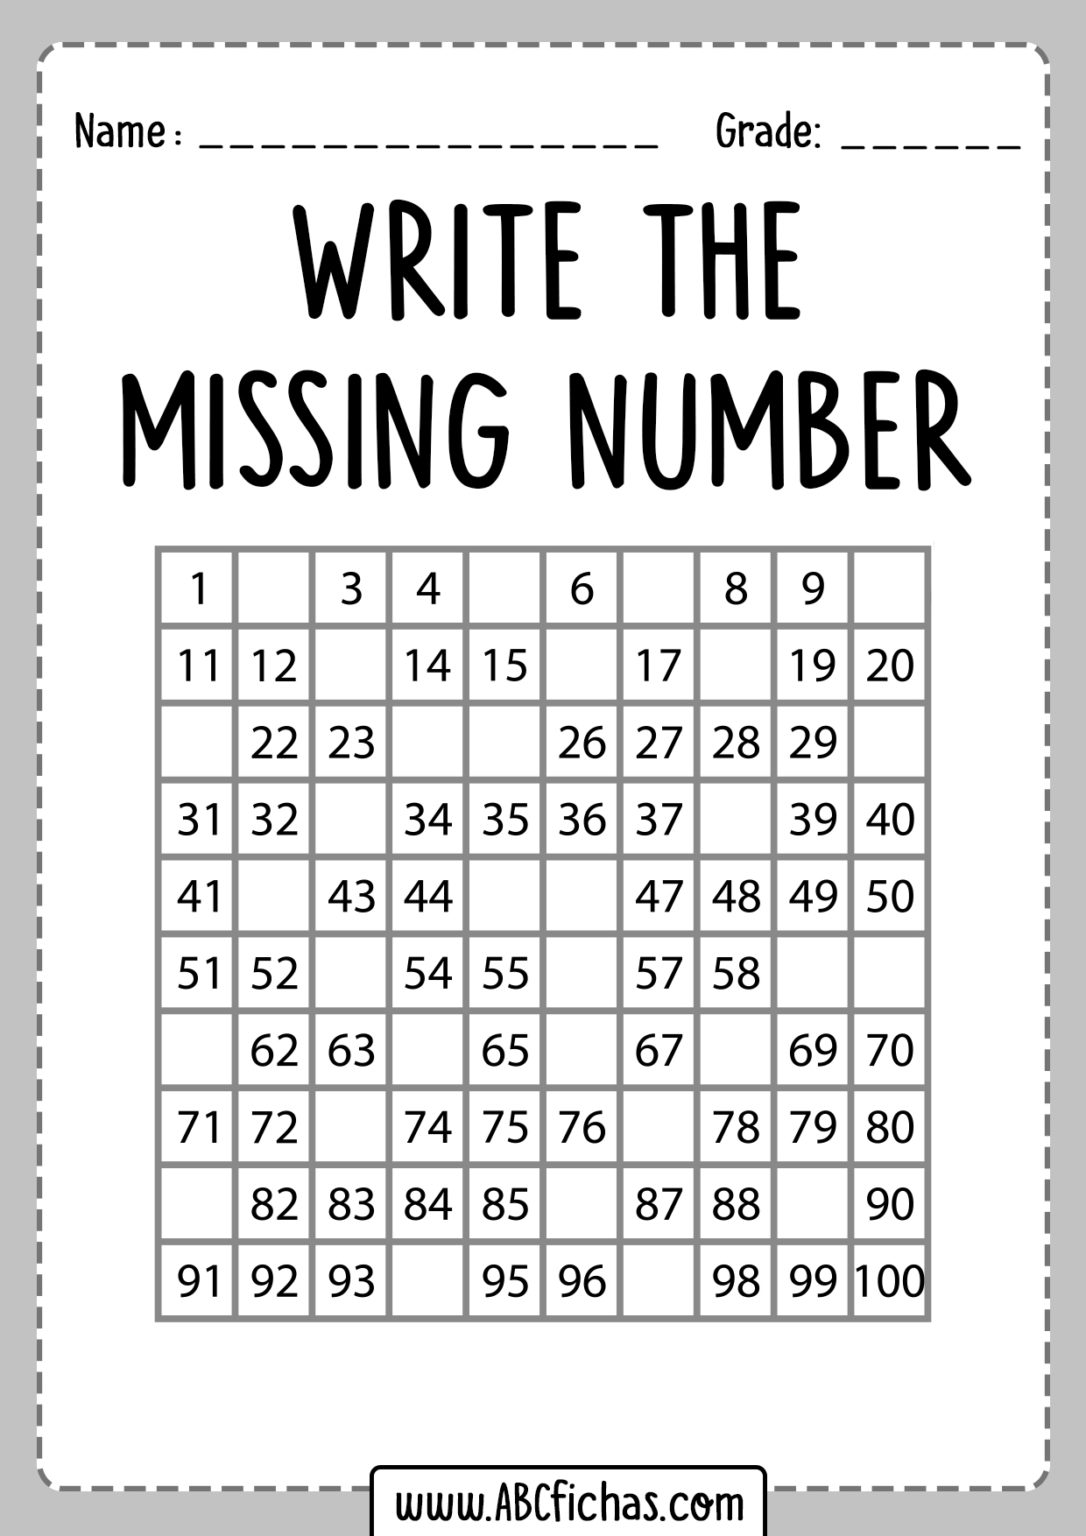 write-the-missing-number-worksheet-abc-fichas